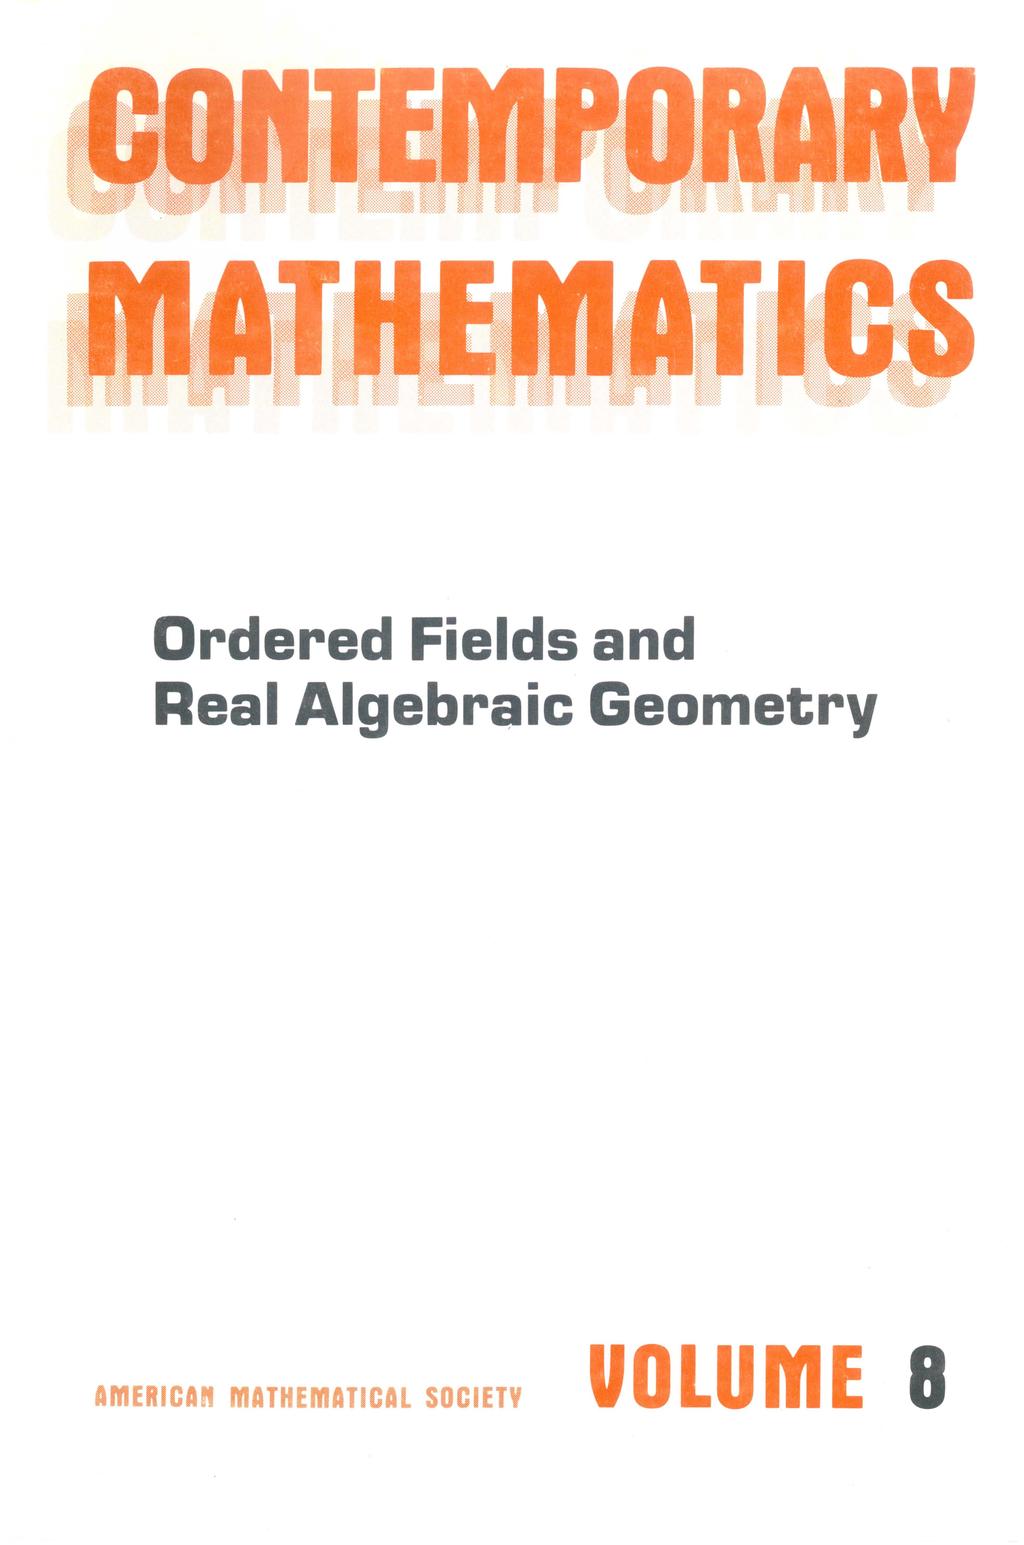 Ordered Fields and Real Algebraic